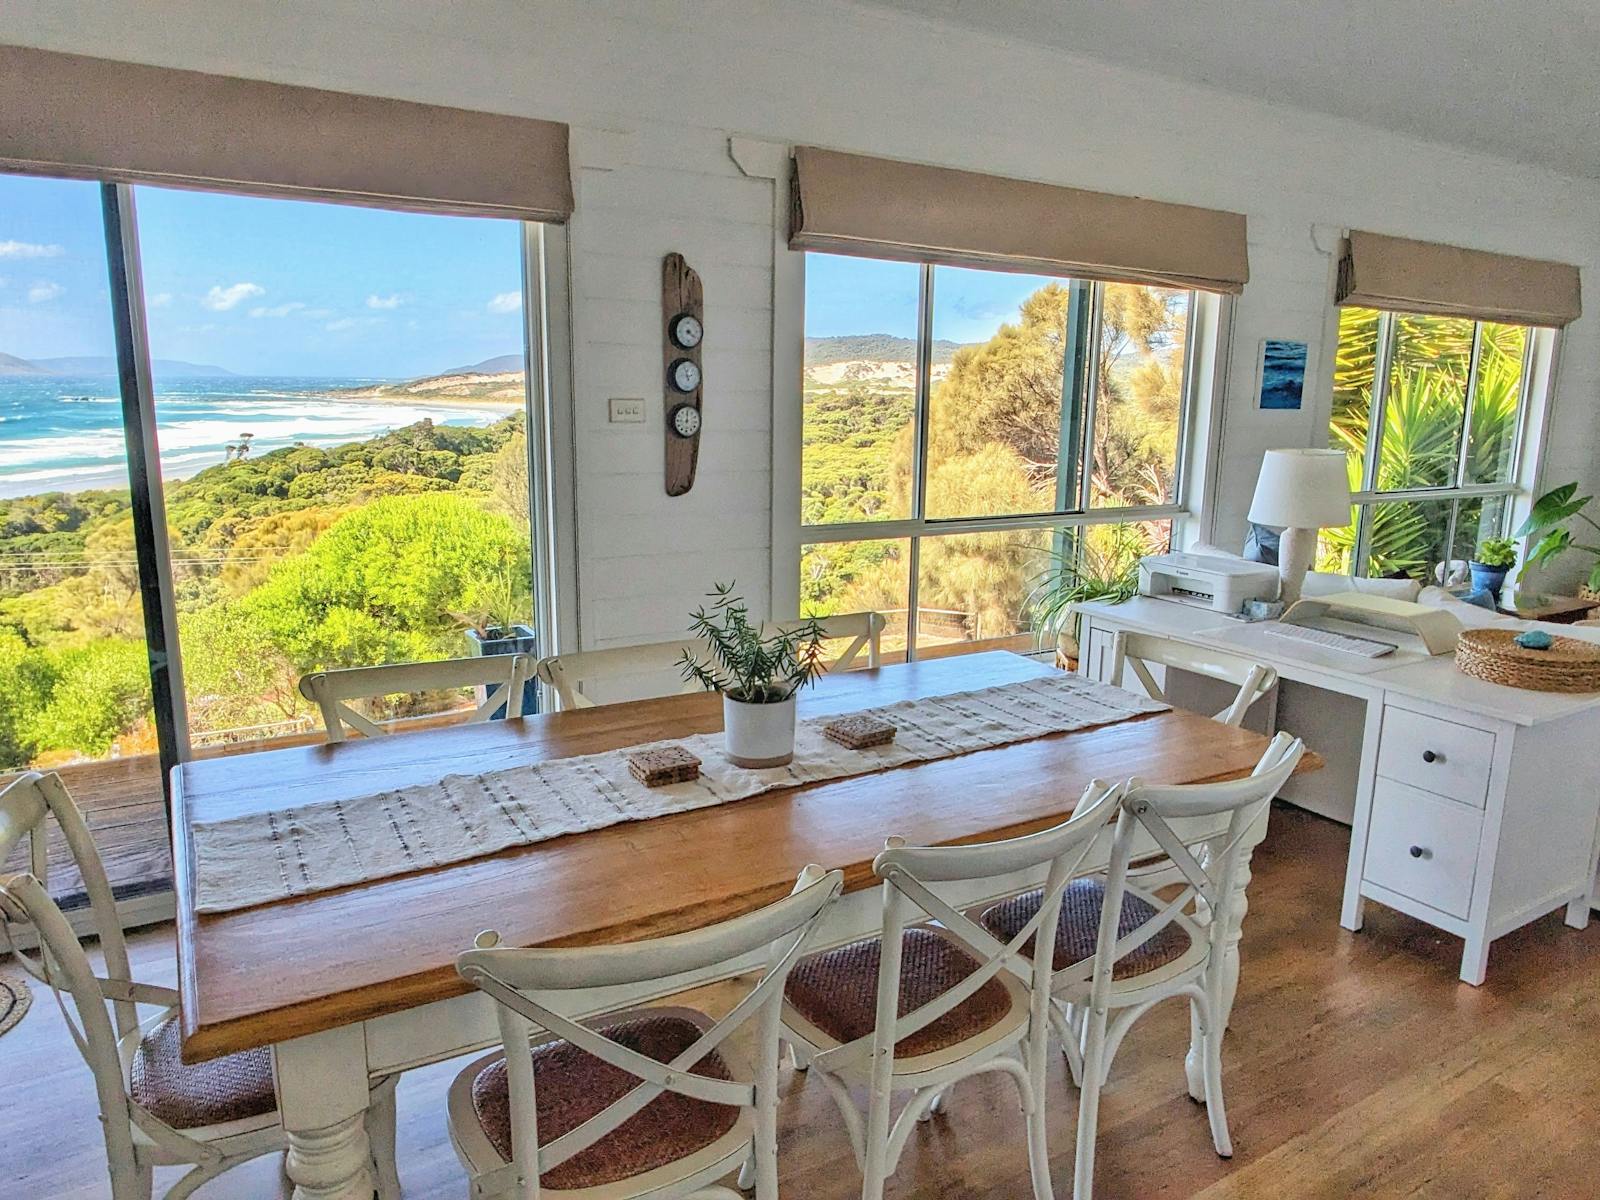 8 seater dining table with desk behind. Large windows look out to view of ocean.